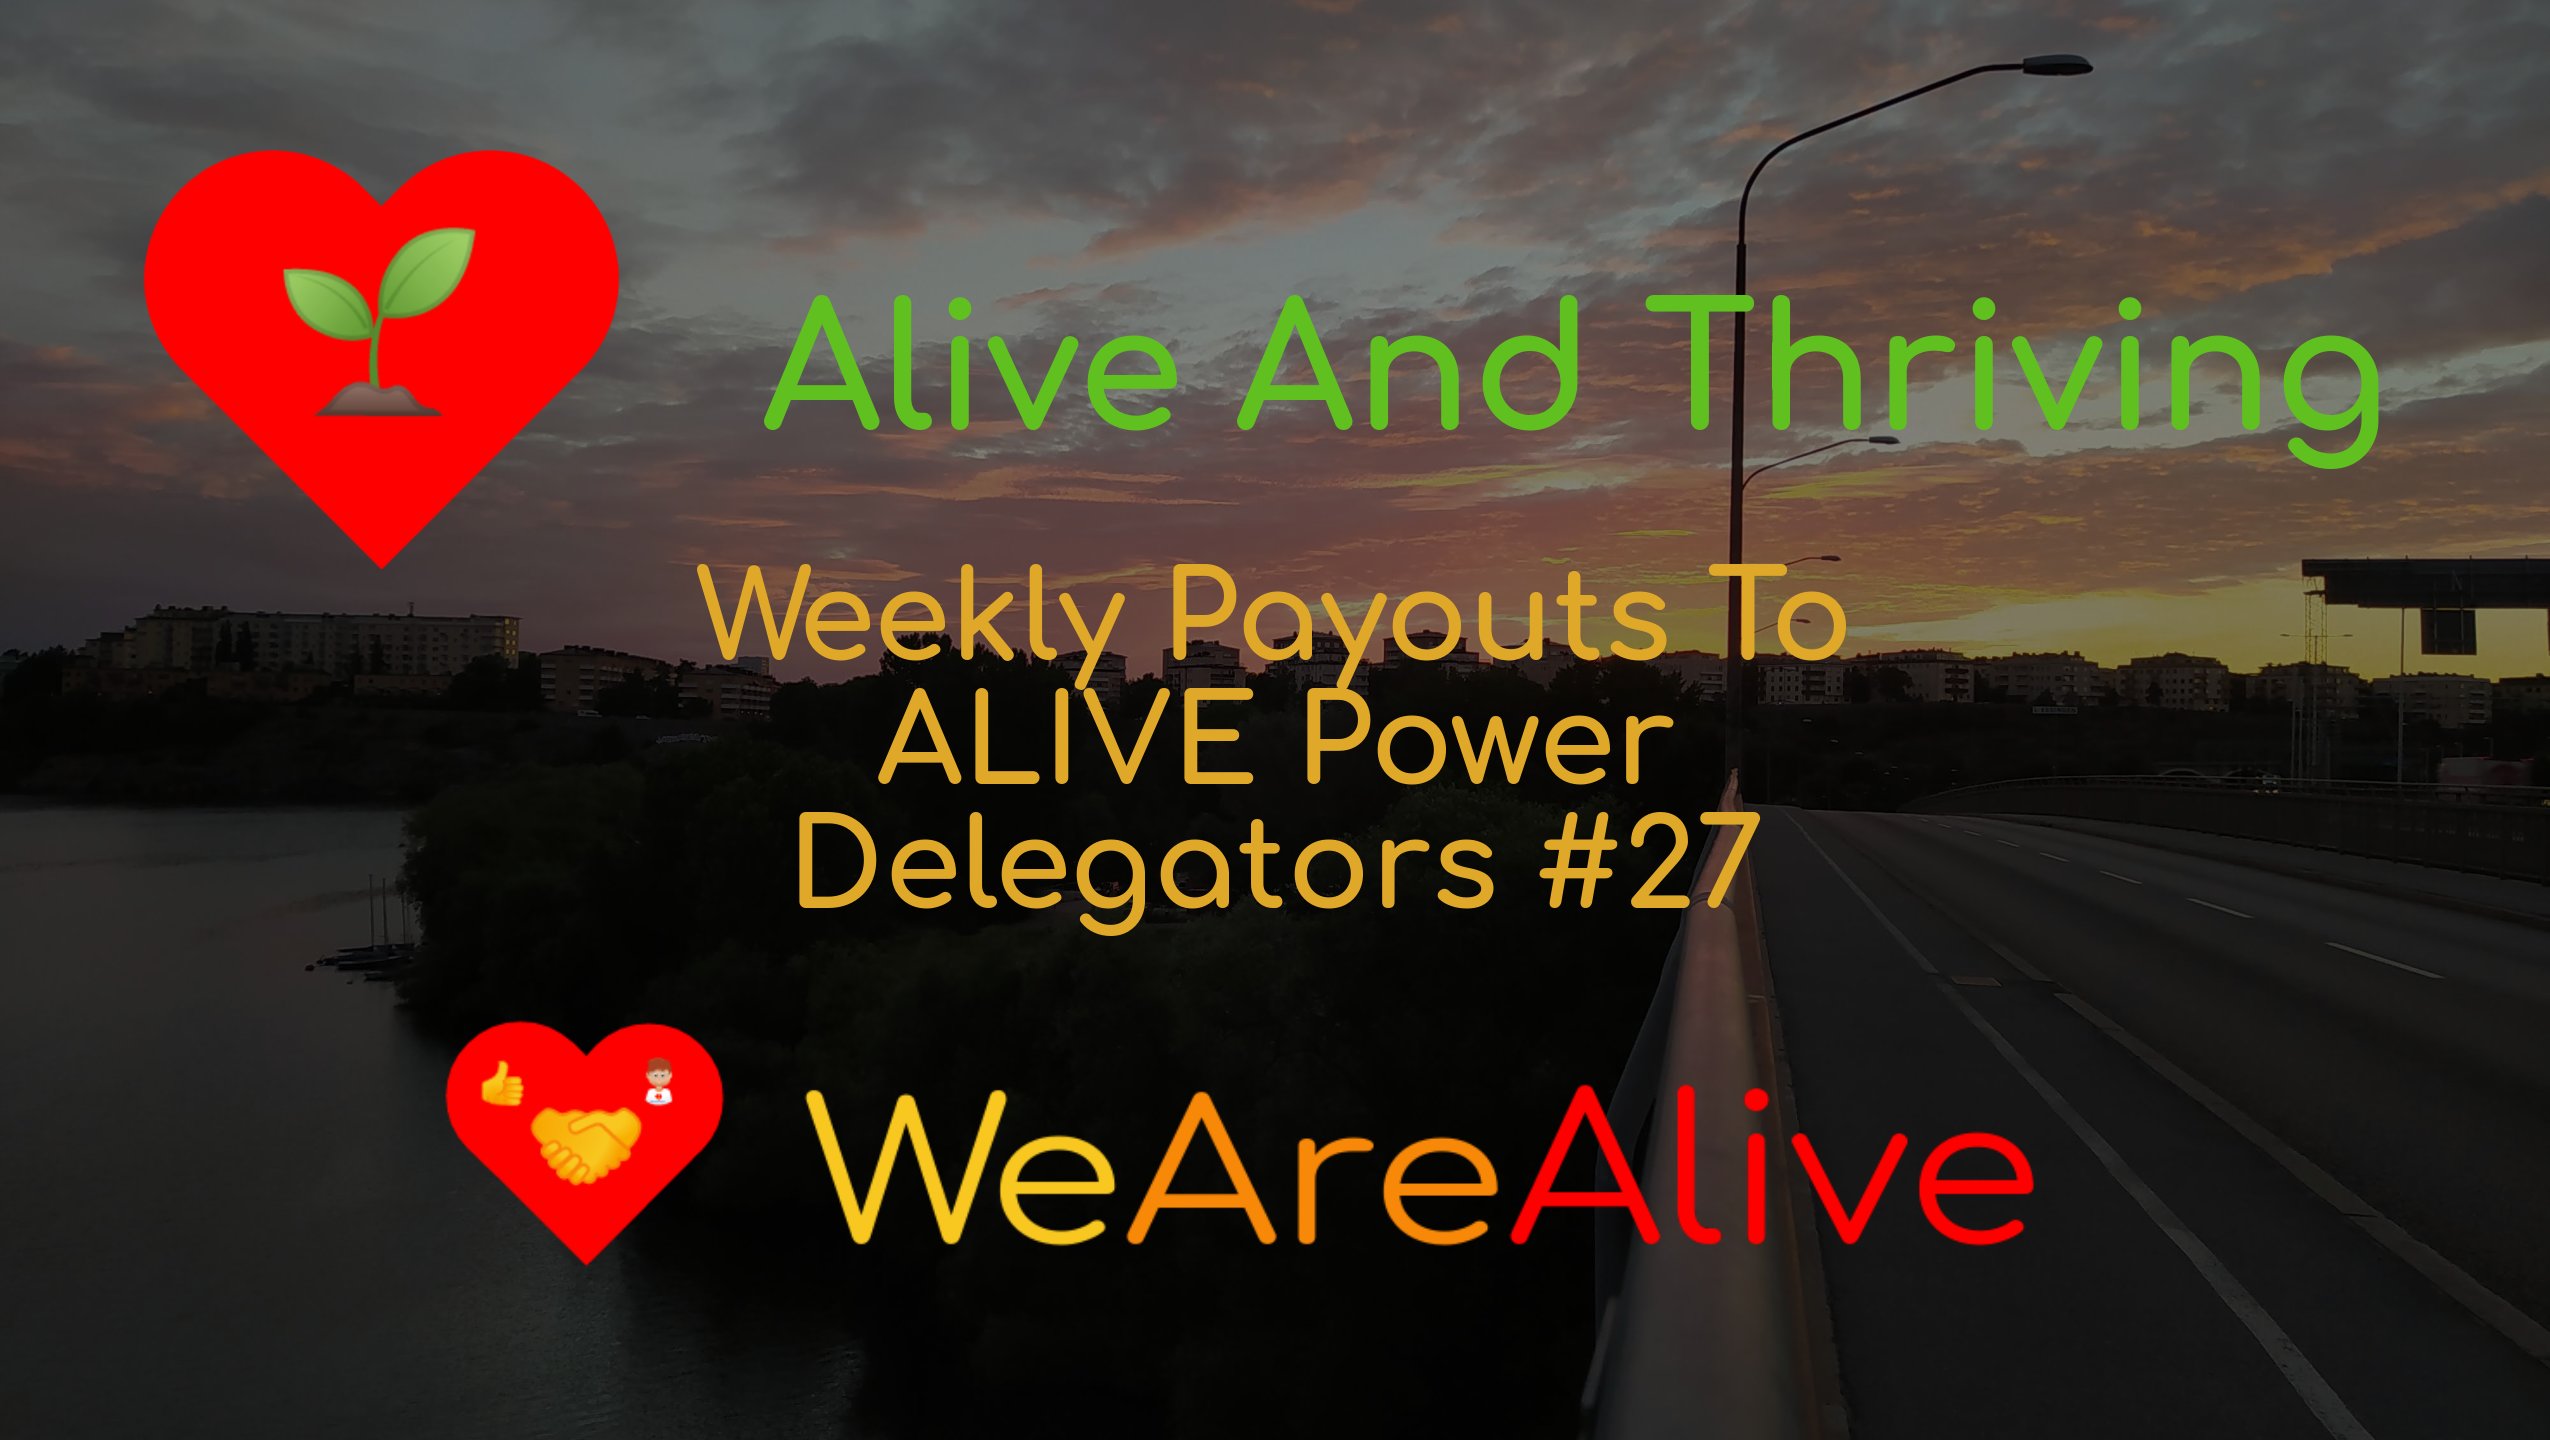 @wearealive/alive-and-thriving-weekly-payouts-to-alive-power-delegators-27